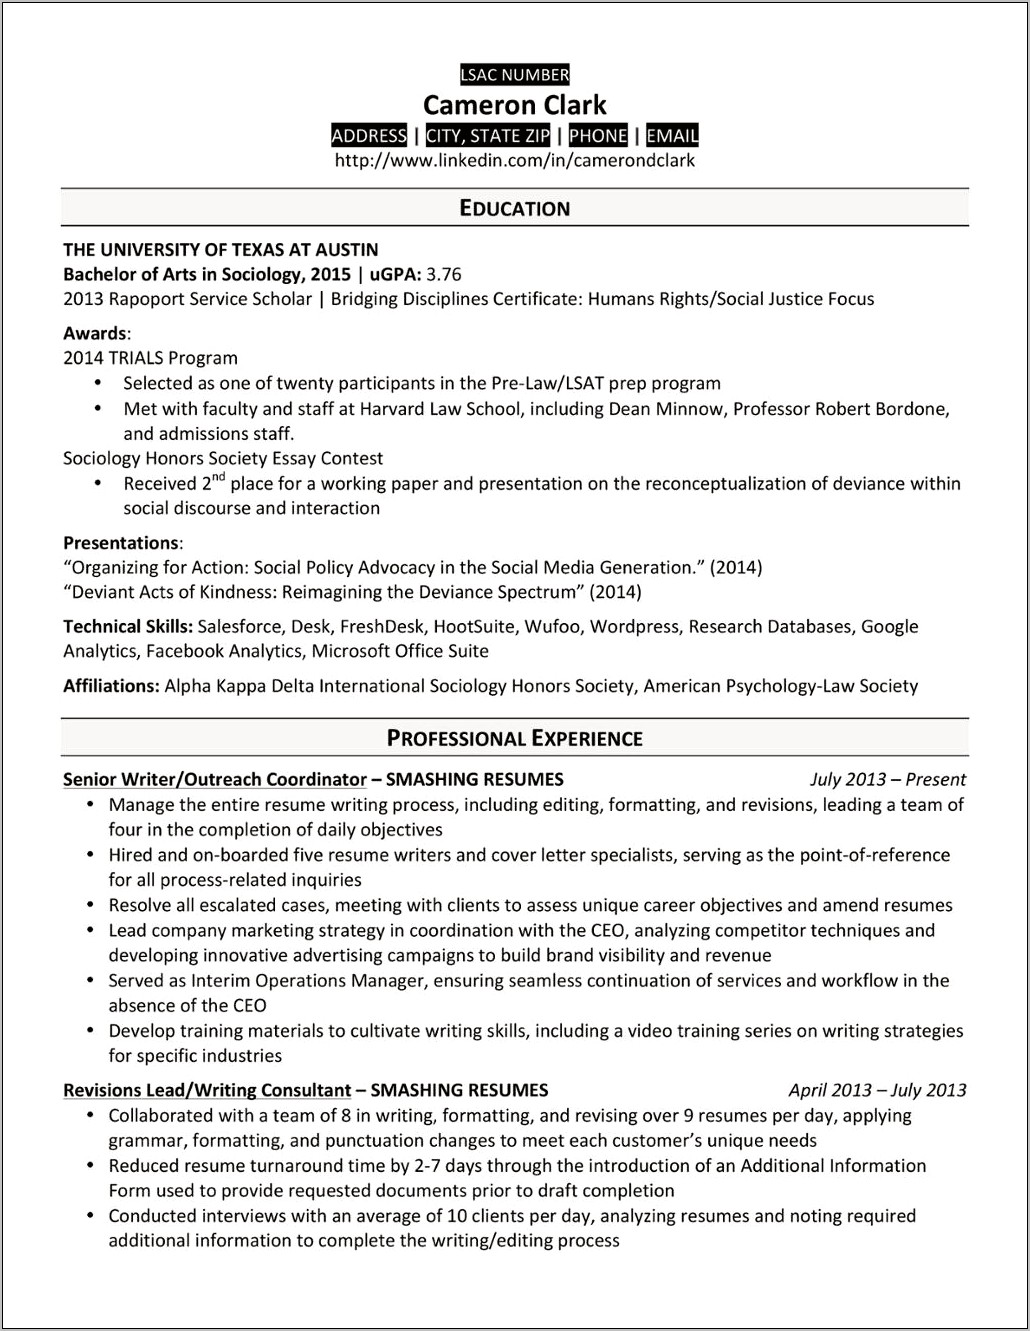 Resume Skills Section For Law School